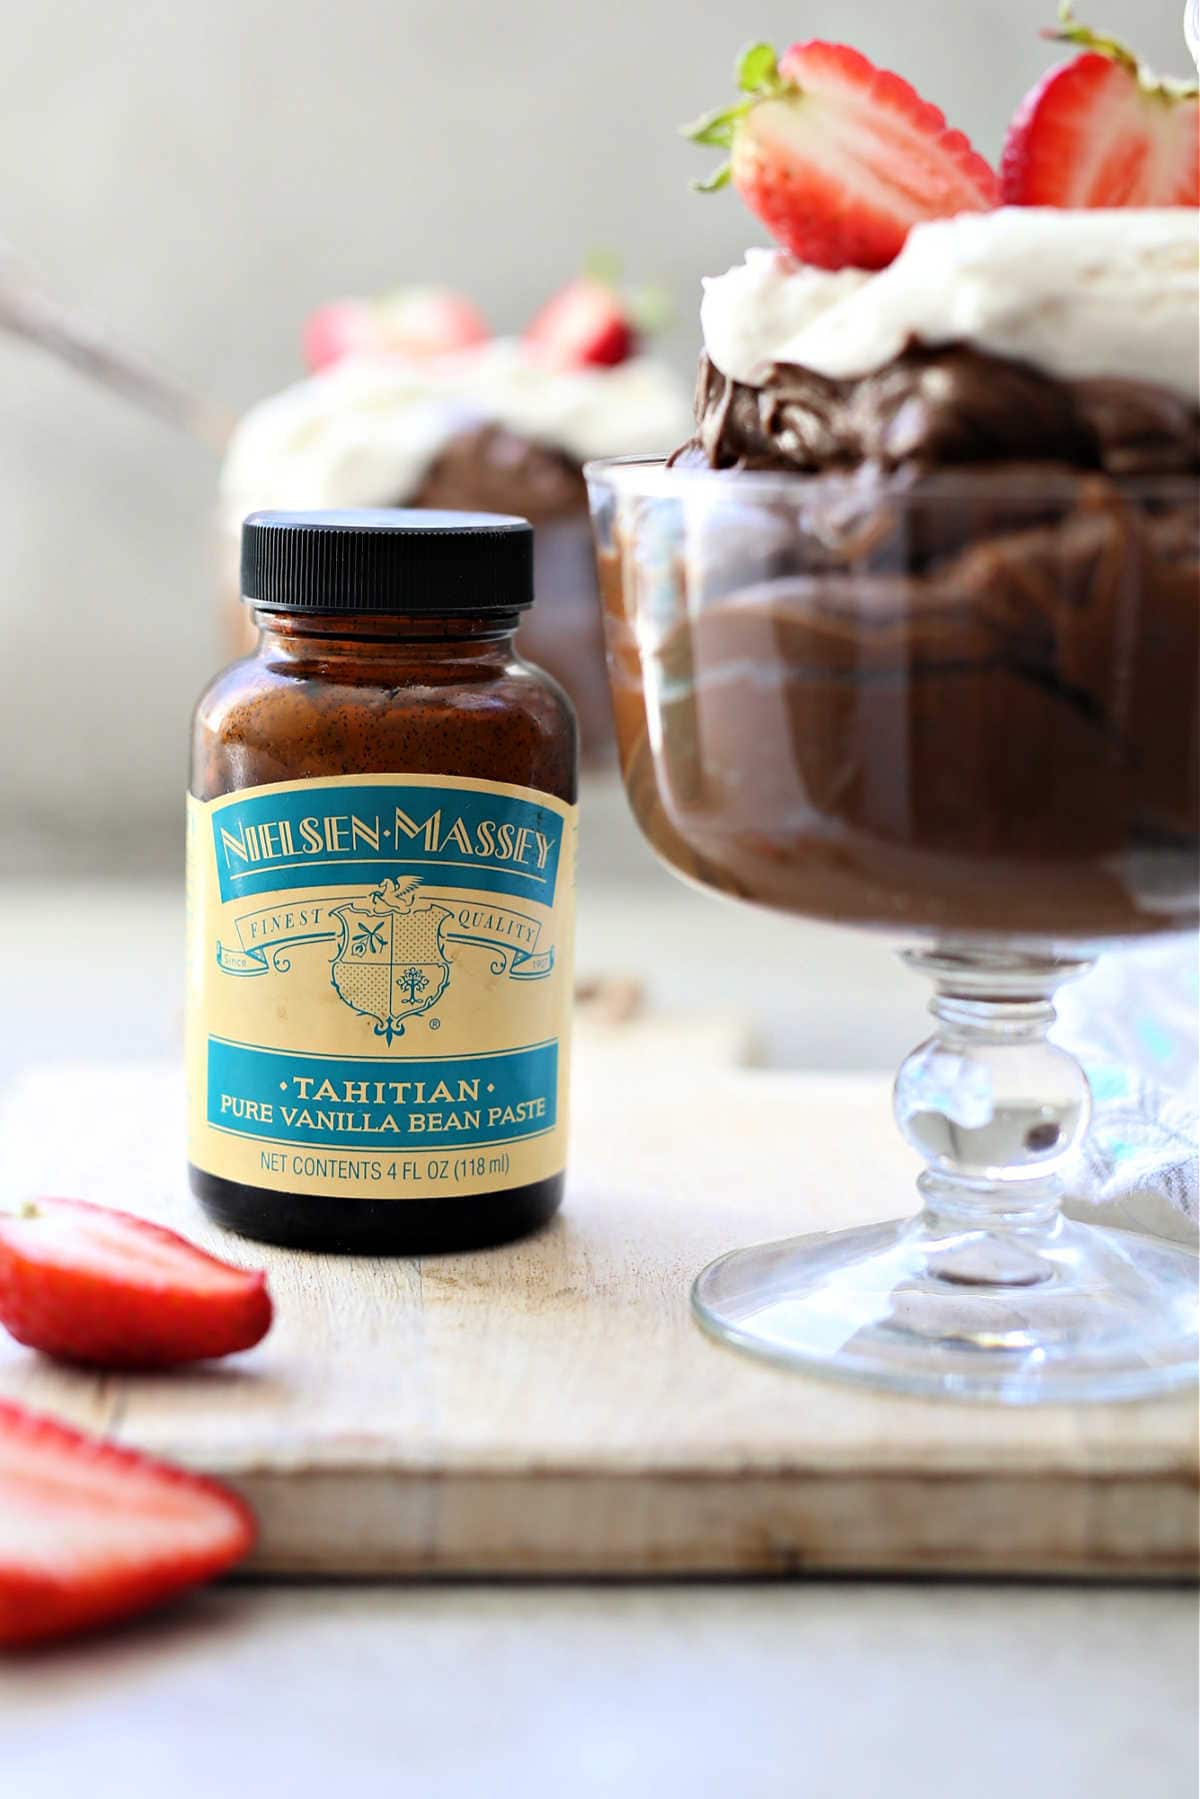 chocolate avocado pudding in a dessert cup with Nielsen-Massey vanilla paste bottle